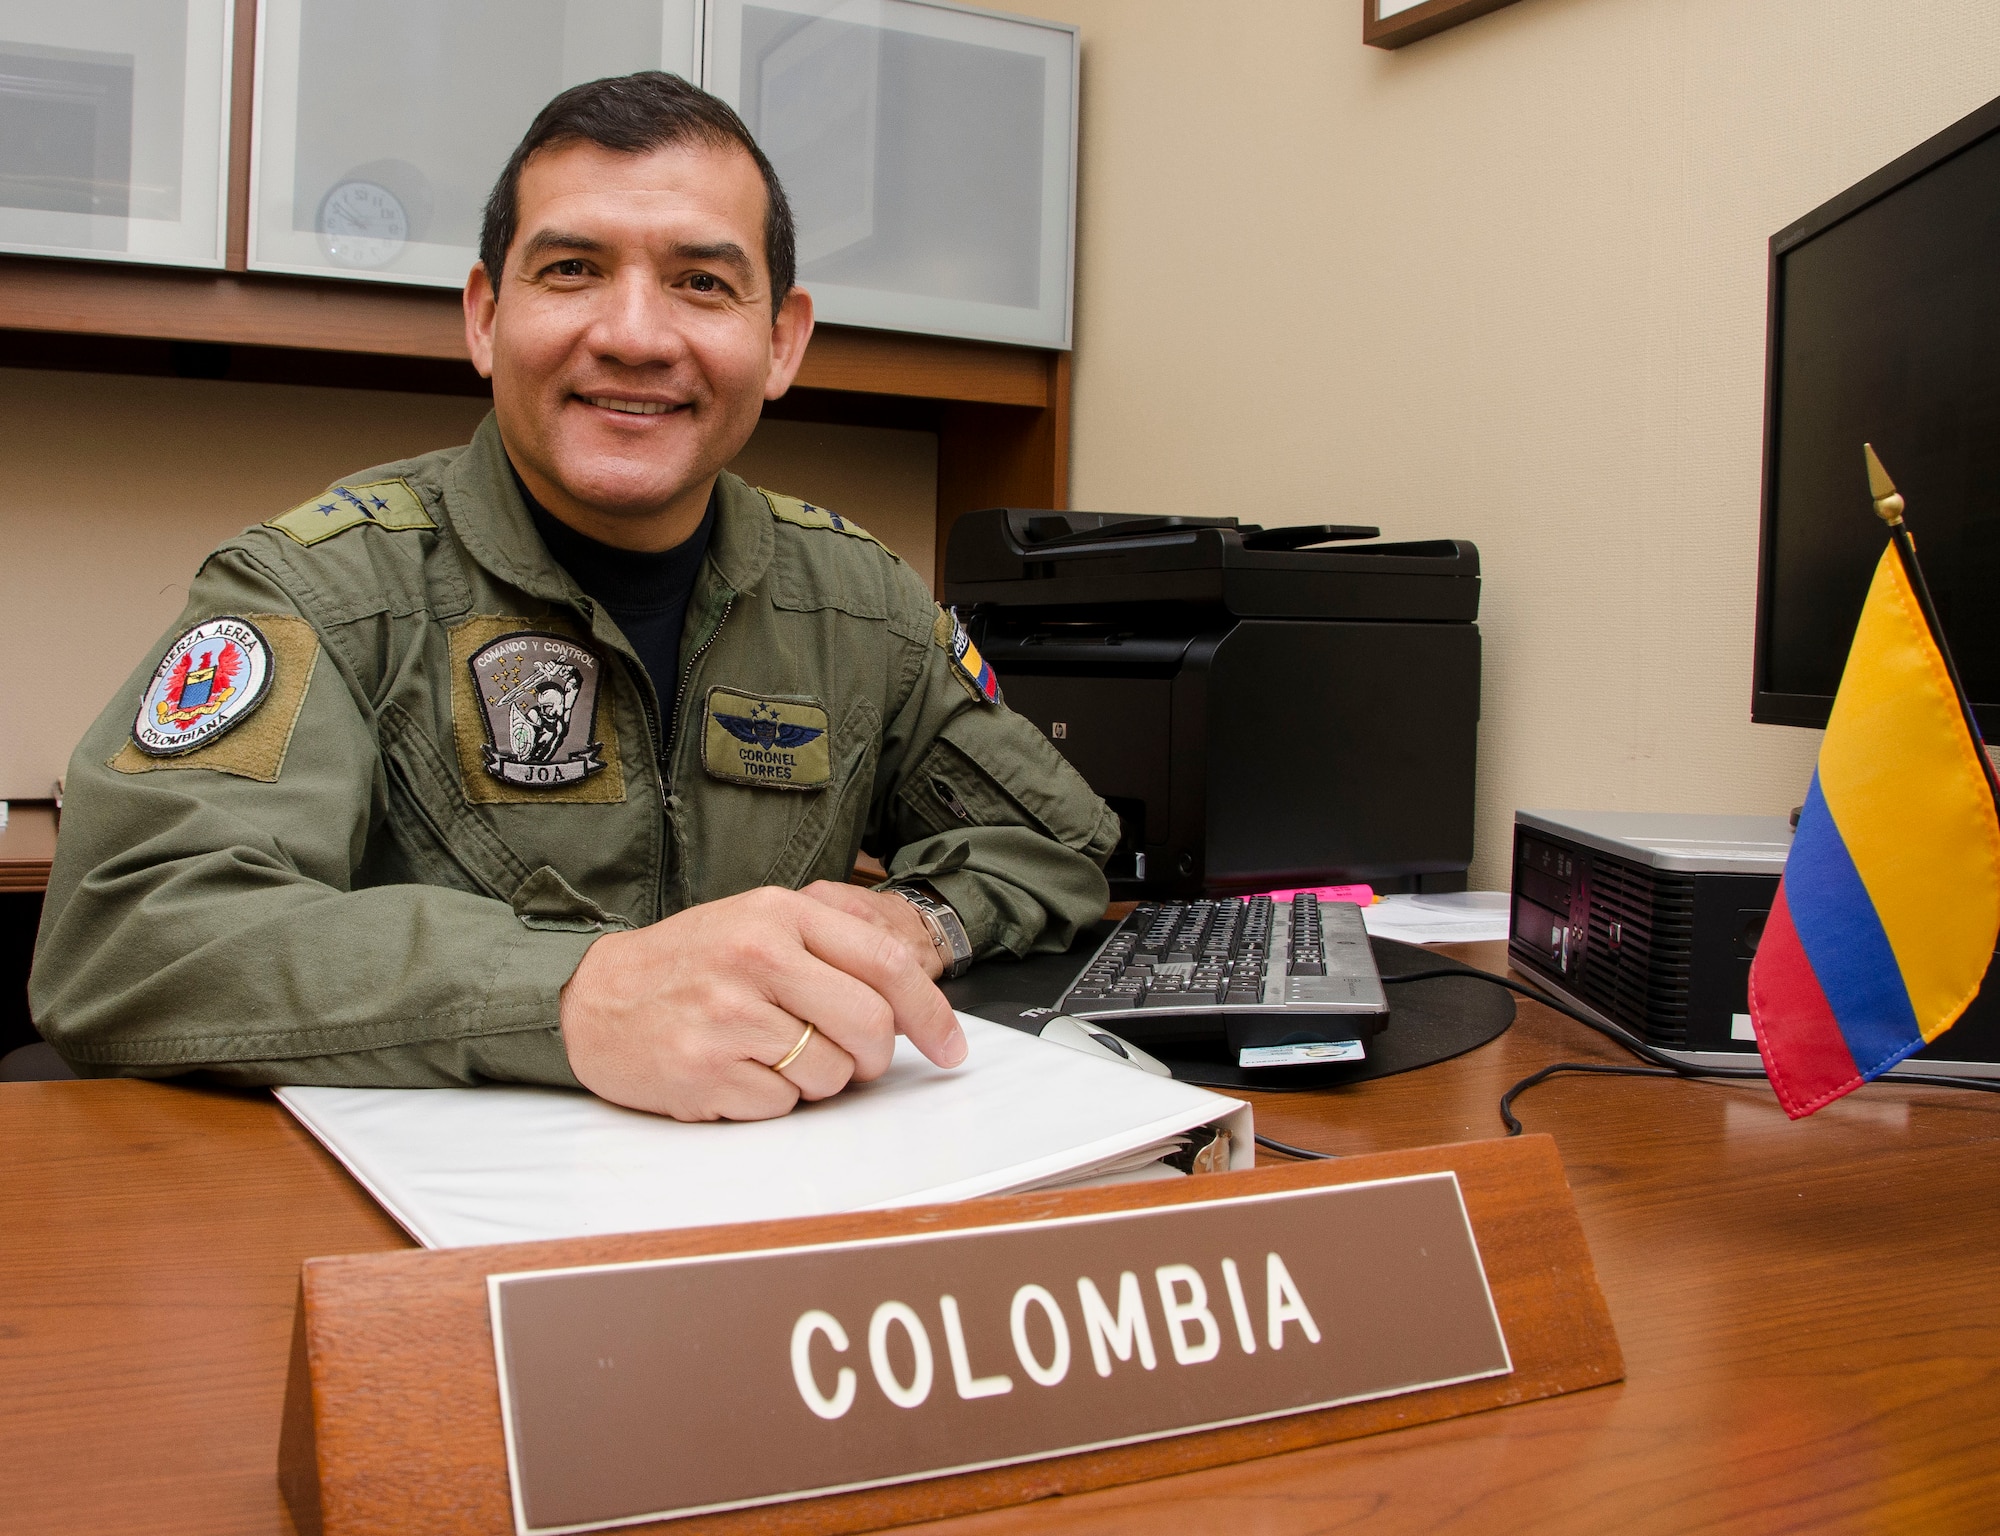 Colonel Carlos Torres, Air Forces Southern Colombian Liaison Officer, smiles before preparing to execute his daily duties as LNO at Davis-Monthan AFB, Ariz., Nov. 5, 2014. Torres has been following in his father’s footsteps and began his Colombian air force career in 1987 and now, as the Colombian air force’s liaison officer for Air Forces Southern, he hopes to raise awareness of the important changes his country has made to become a regional leader in South America. (U.S. Air Force photo by Staff Sgt. Adam Grant/Released) 